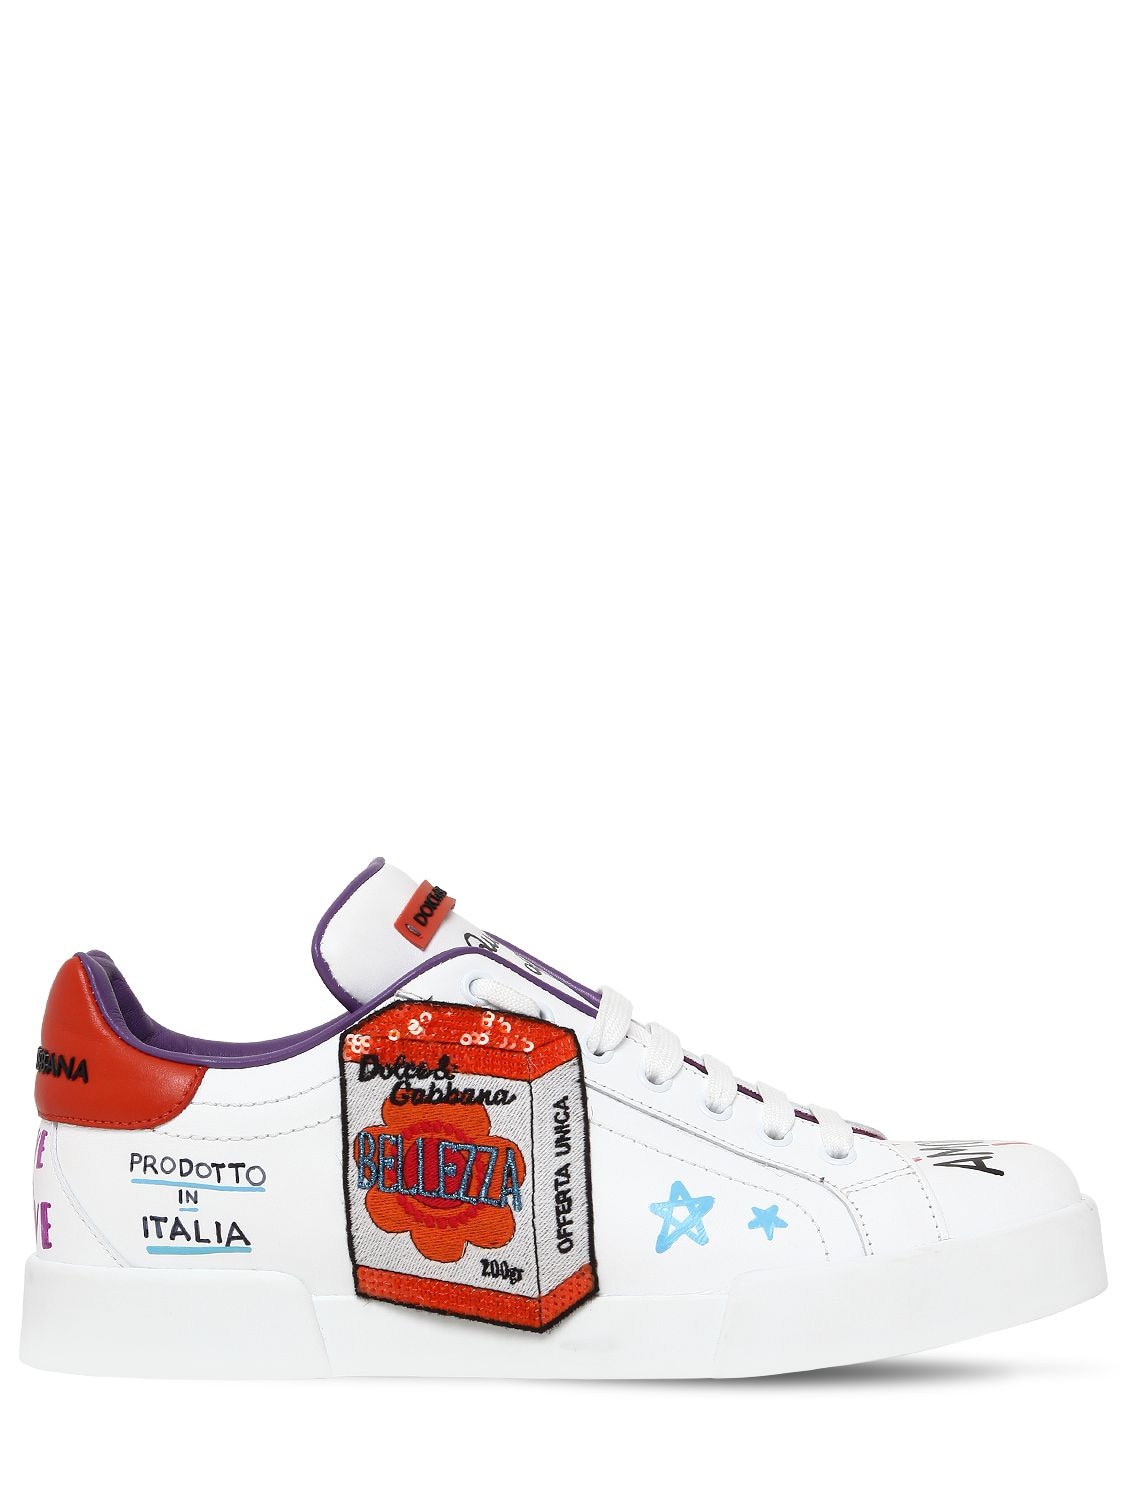 DOLCE & GABBANA 20MM GRAFFITI & PATCHES LEATHER SNEAKERS,67IA81006-SFdGNTc1